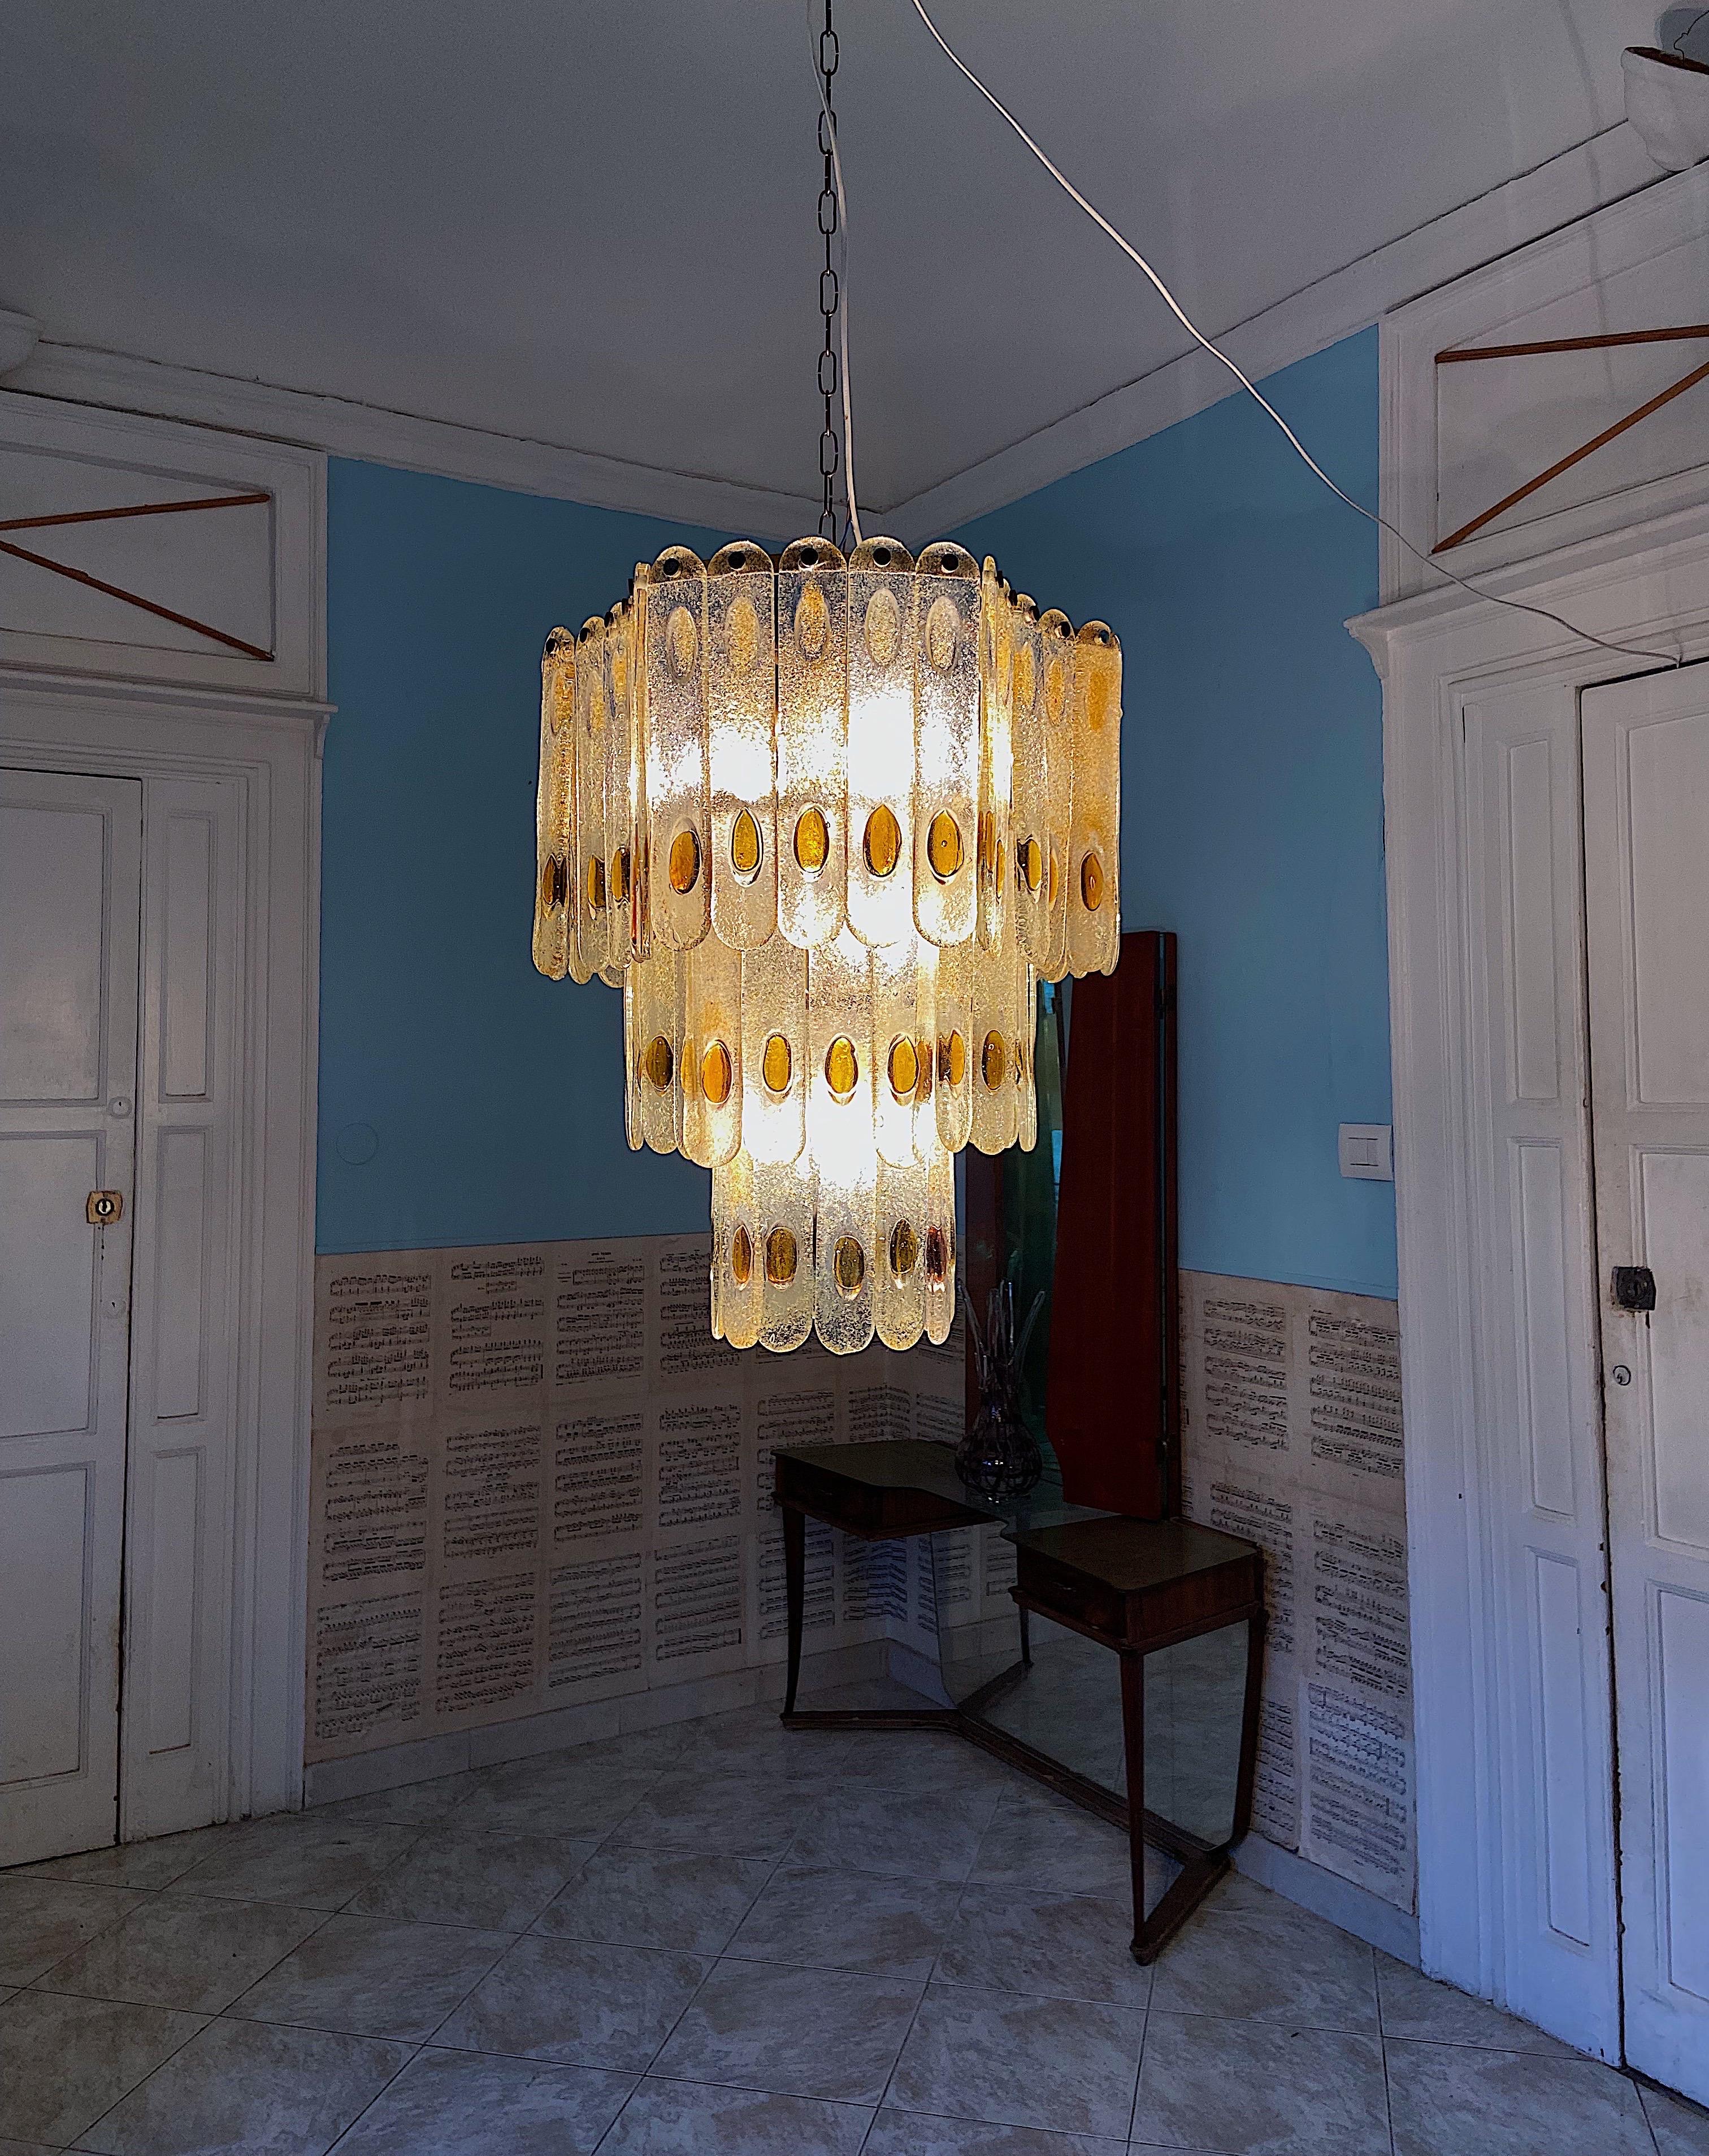 Mid-Century modern chandelier by Mazzega, Murano. 61Murano glasses set on a metal base consisting of 3 tiers.
The light has 7 bulbs.

Details
Creator: Mazzega, Murano
Dimensions: Height without chain 63 cm Diameter: 50 cm.
Materials and